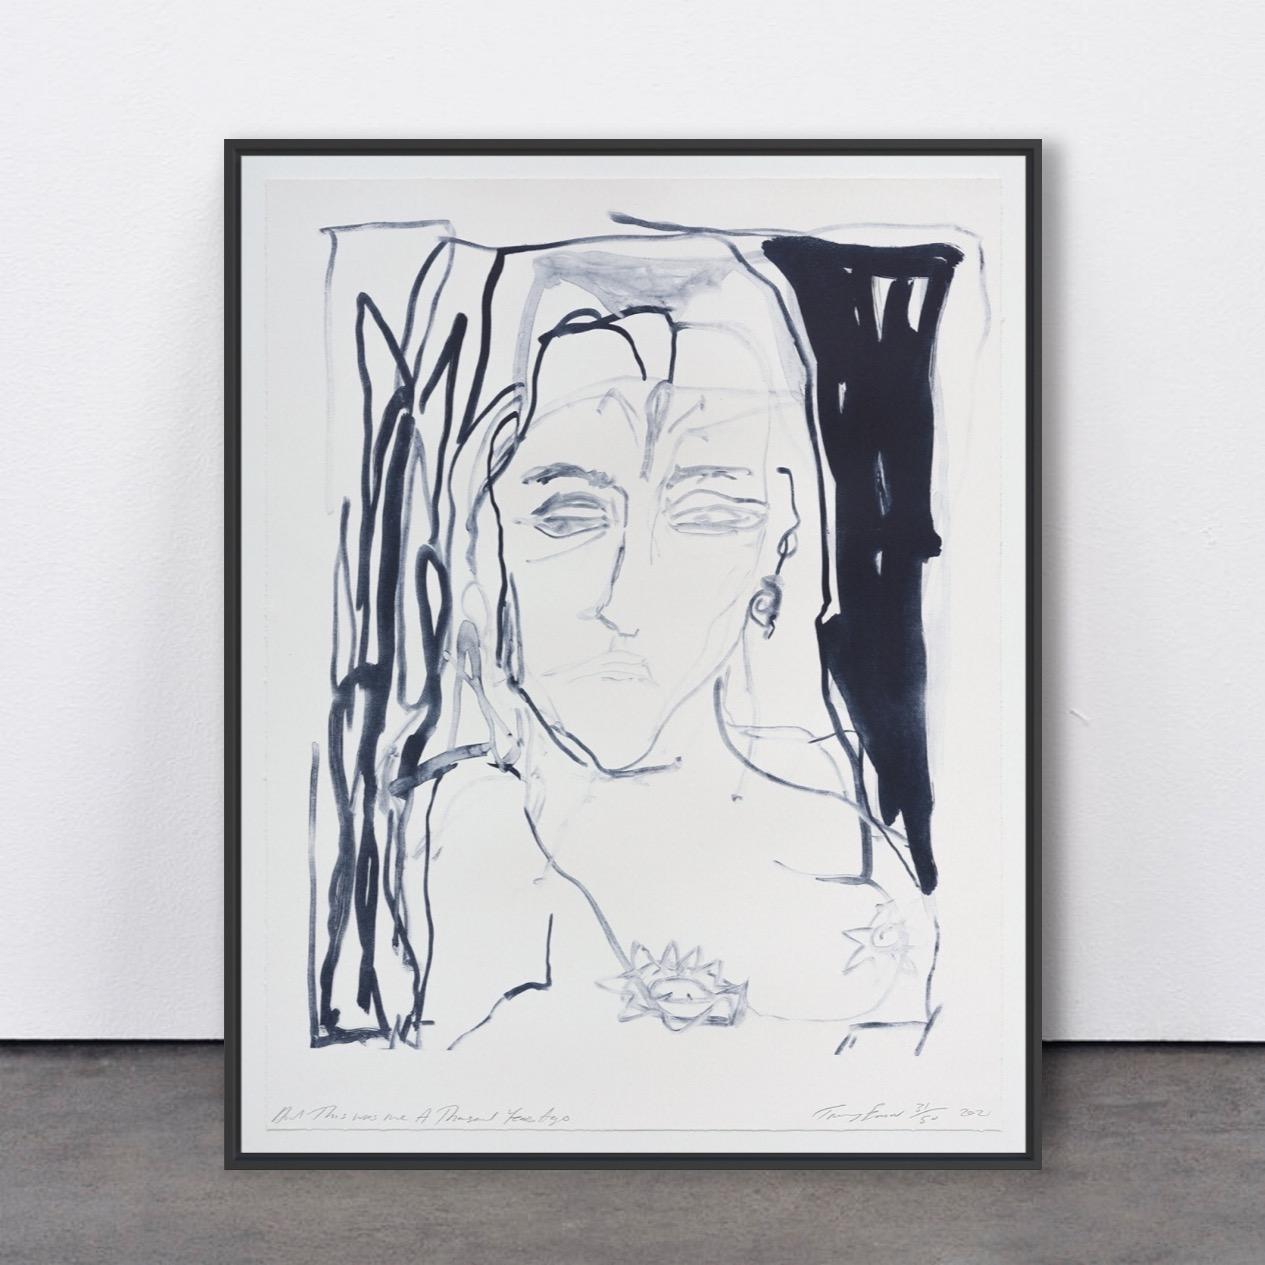 Tracey Emin Figurative Print - And This was me A Thousand Years, (from A Journey to Death) - Litograph, Emin